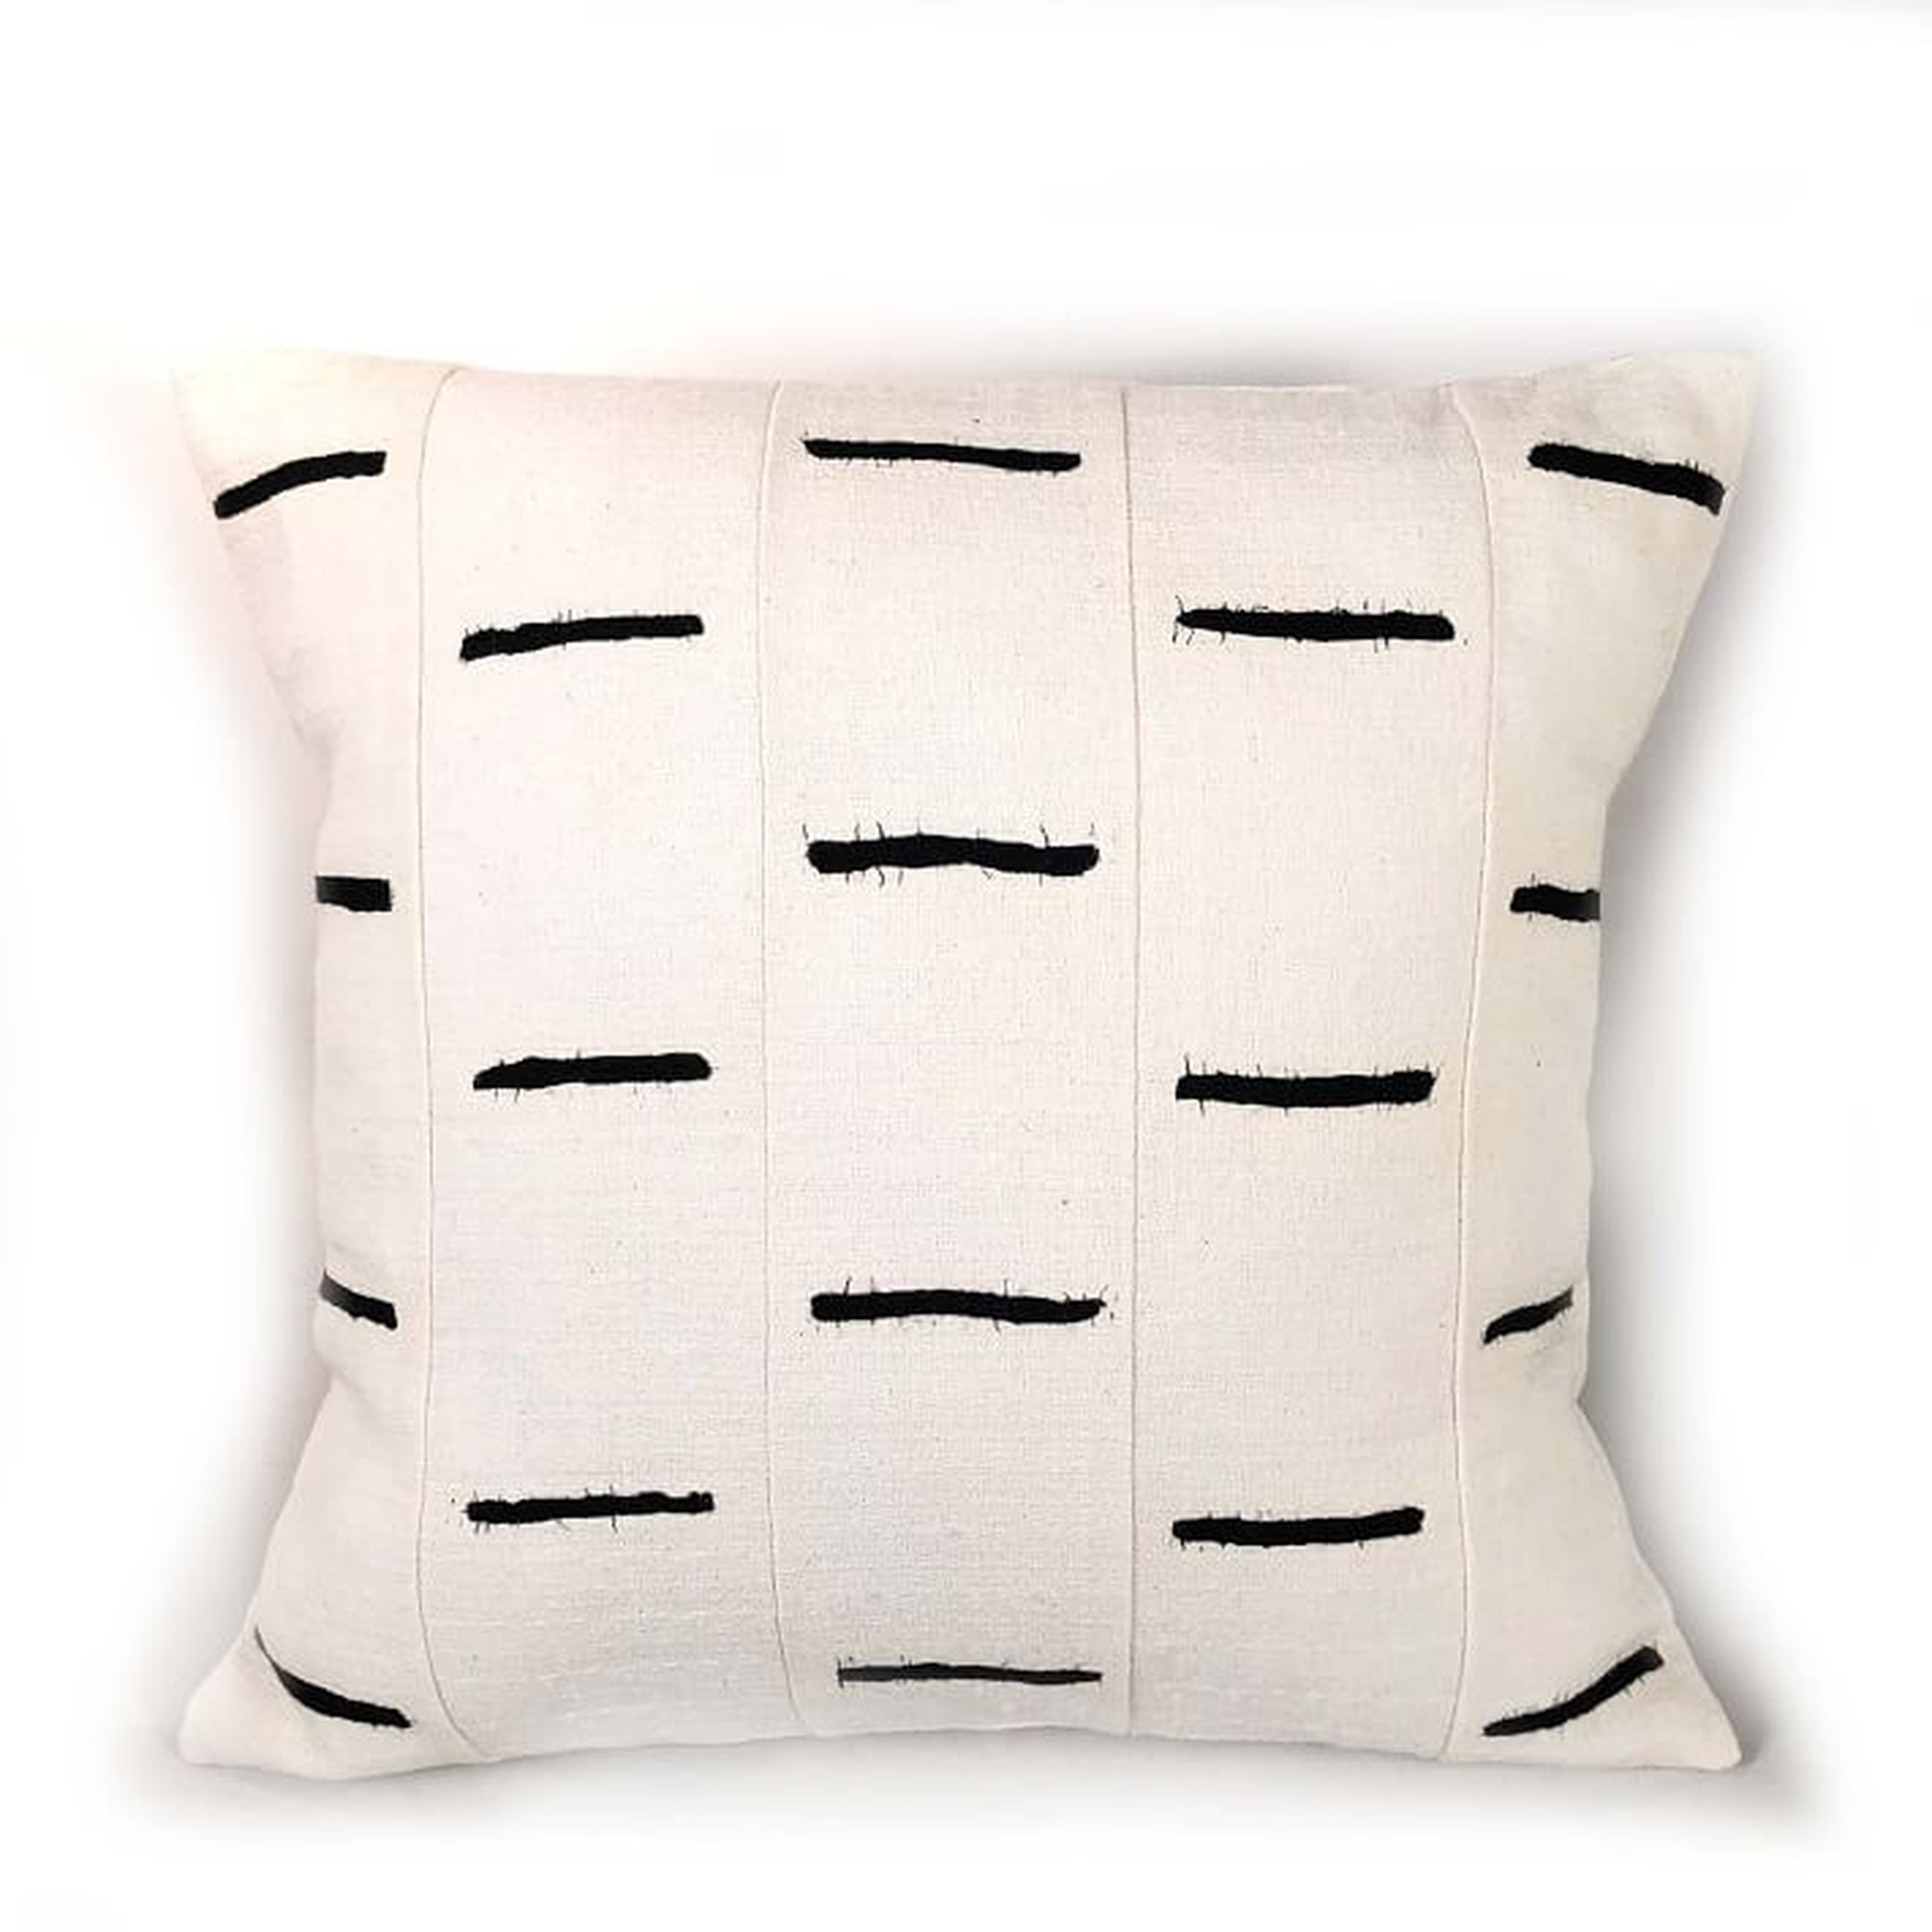 Tonga Pillow Cover - Black Dashes - West Elm